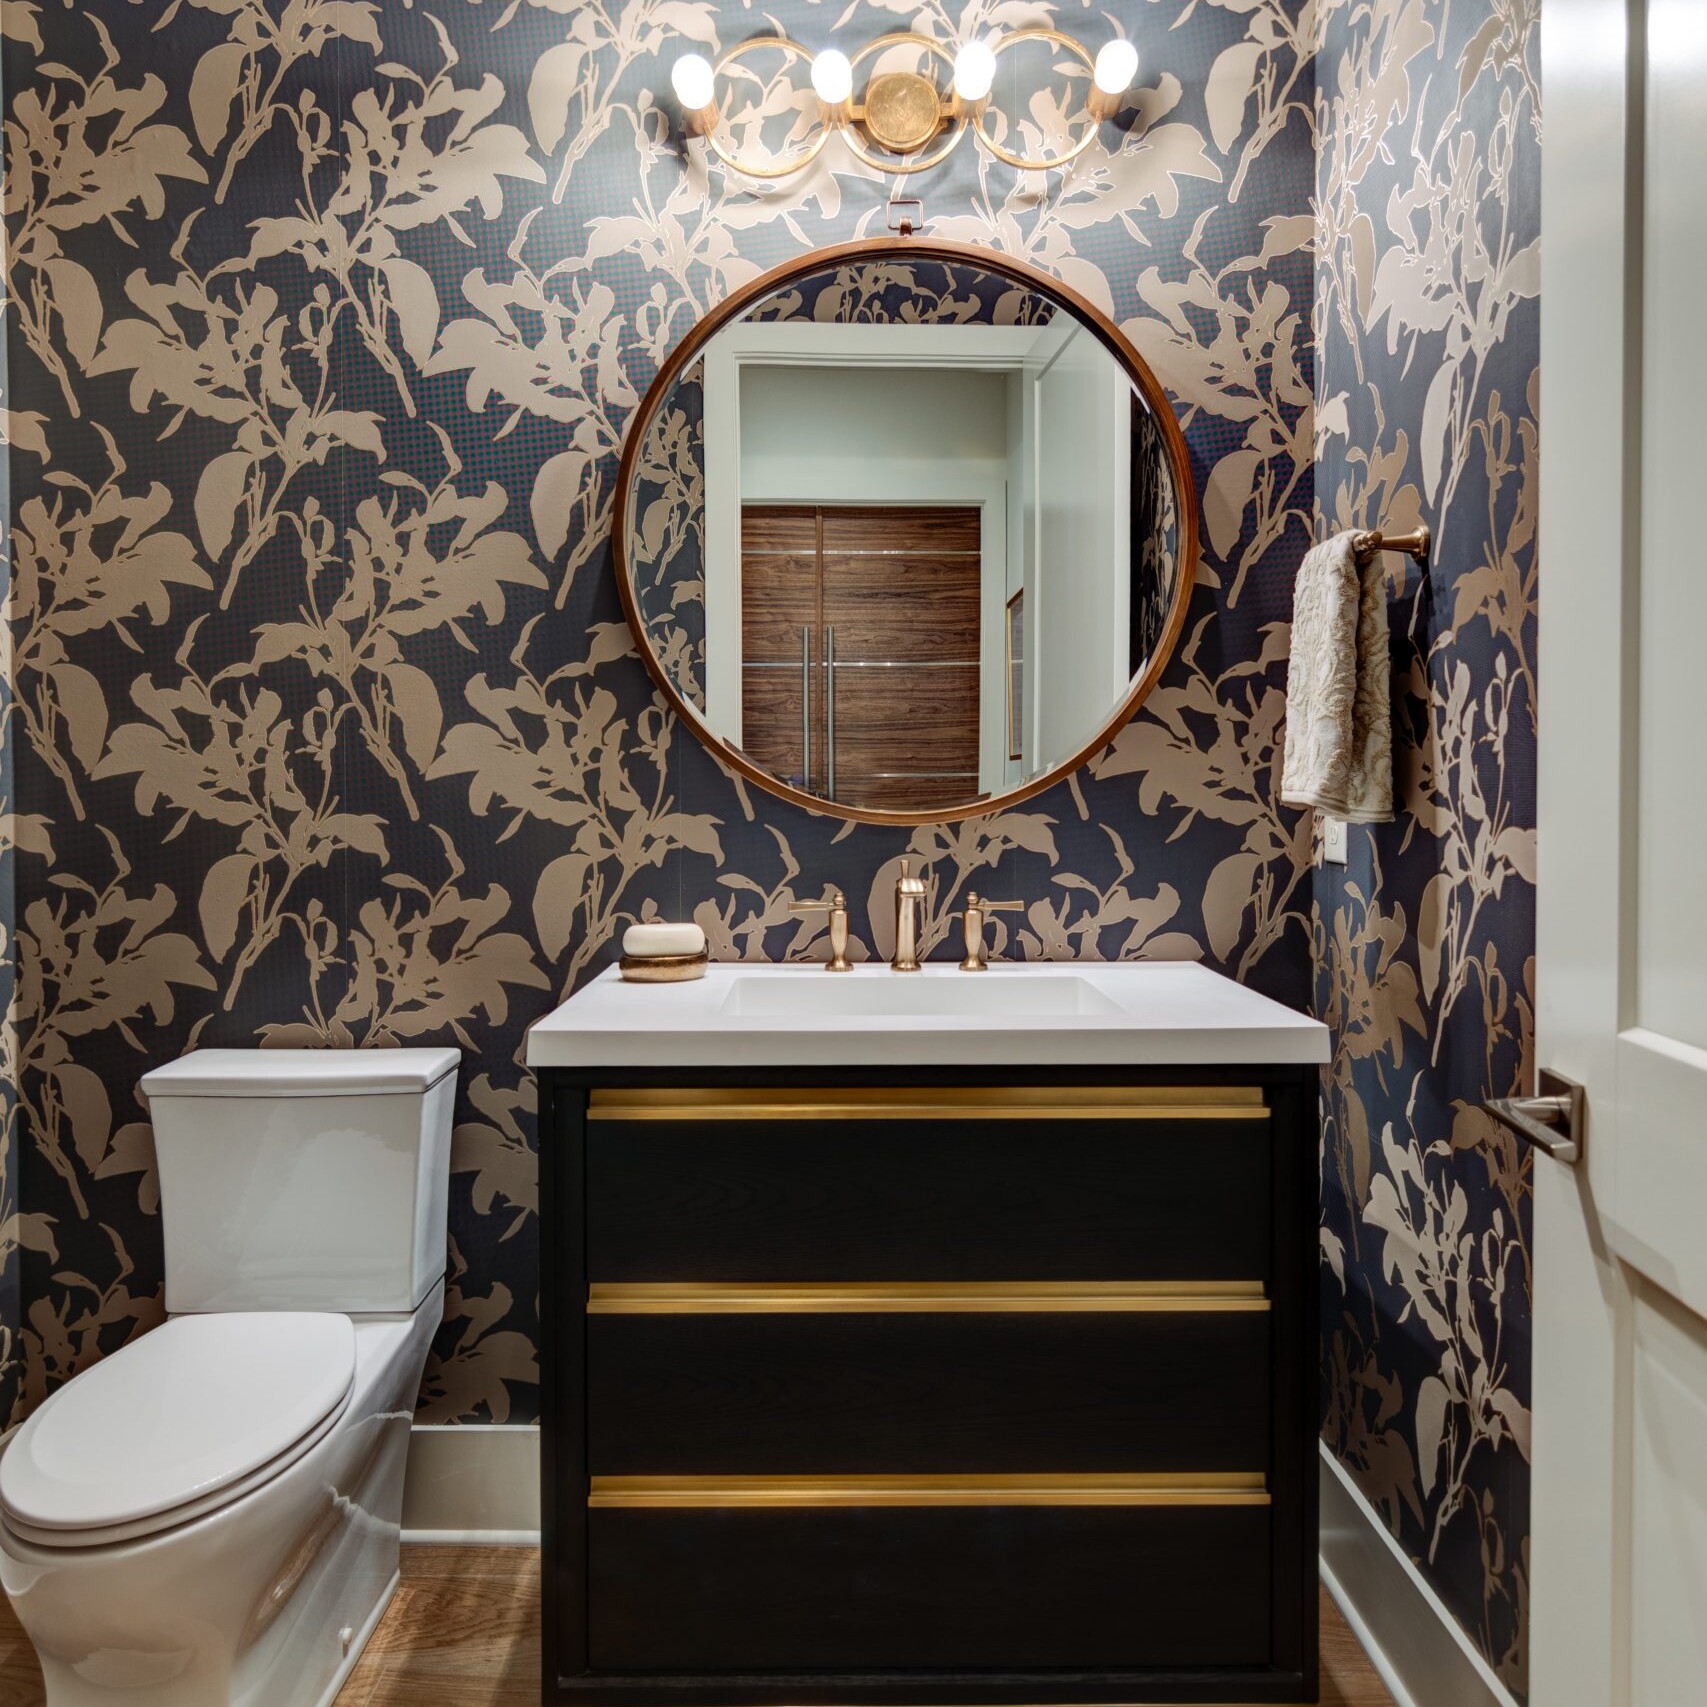 A black and gold bathroom with floral wallpaper.